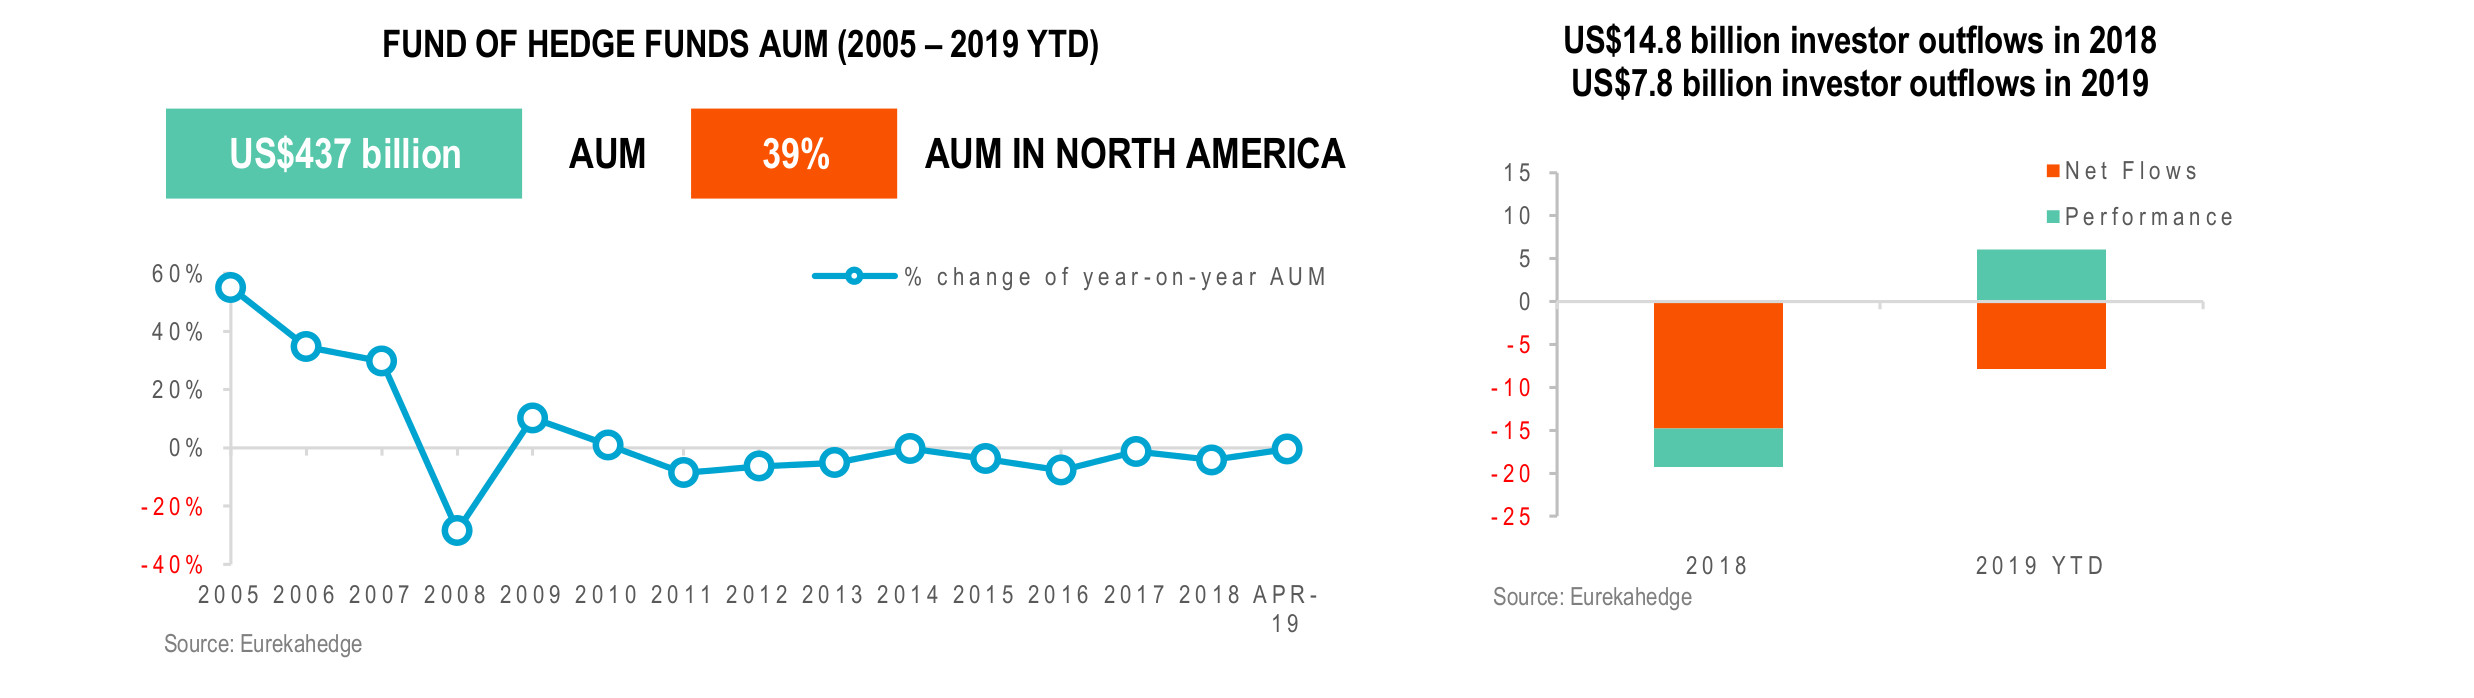 Funds of Hedge Funds Infographic June 2019 - AUM